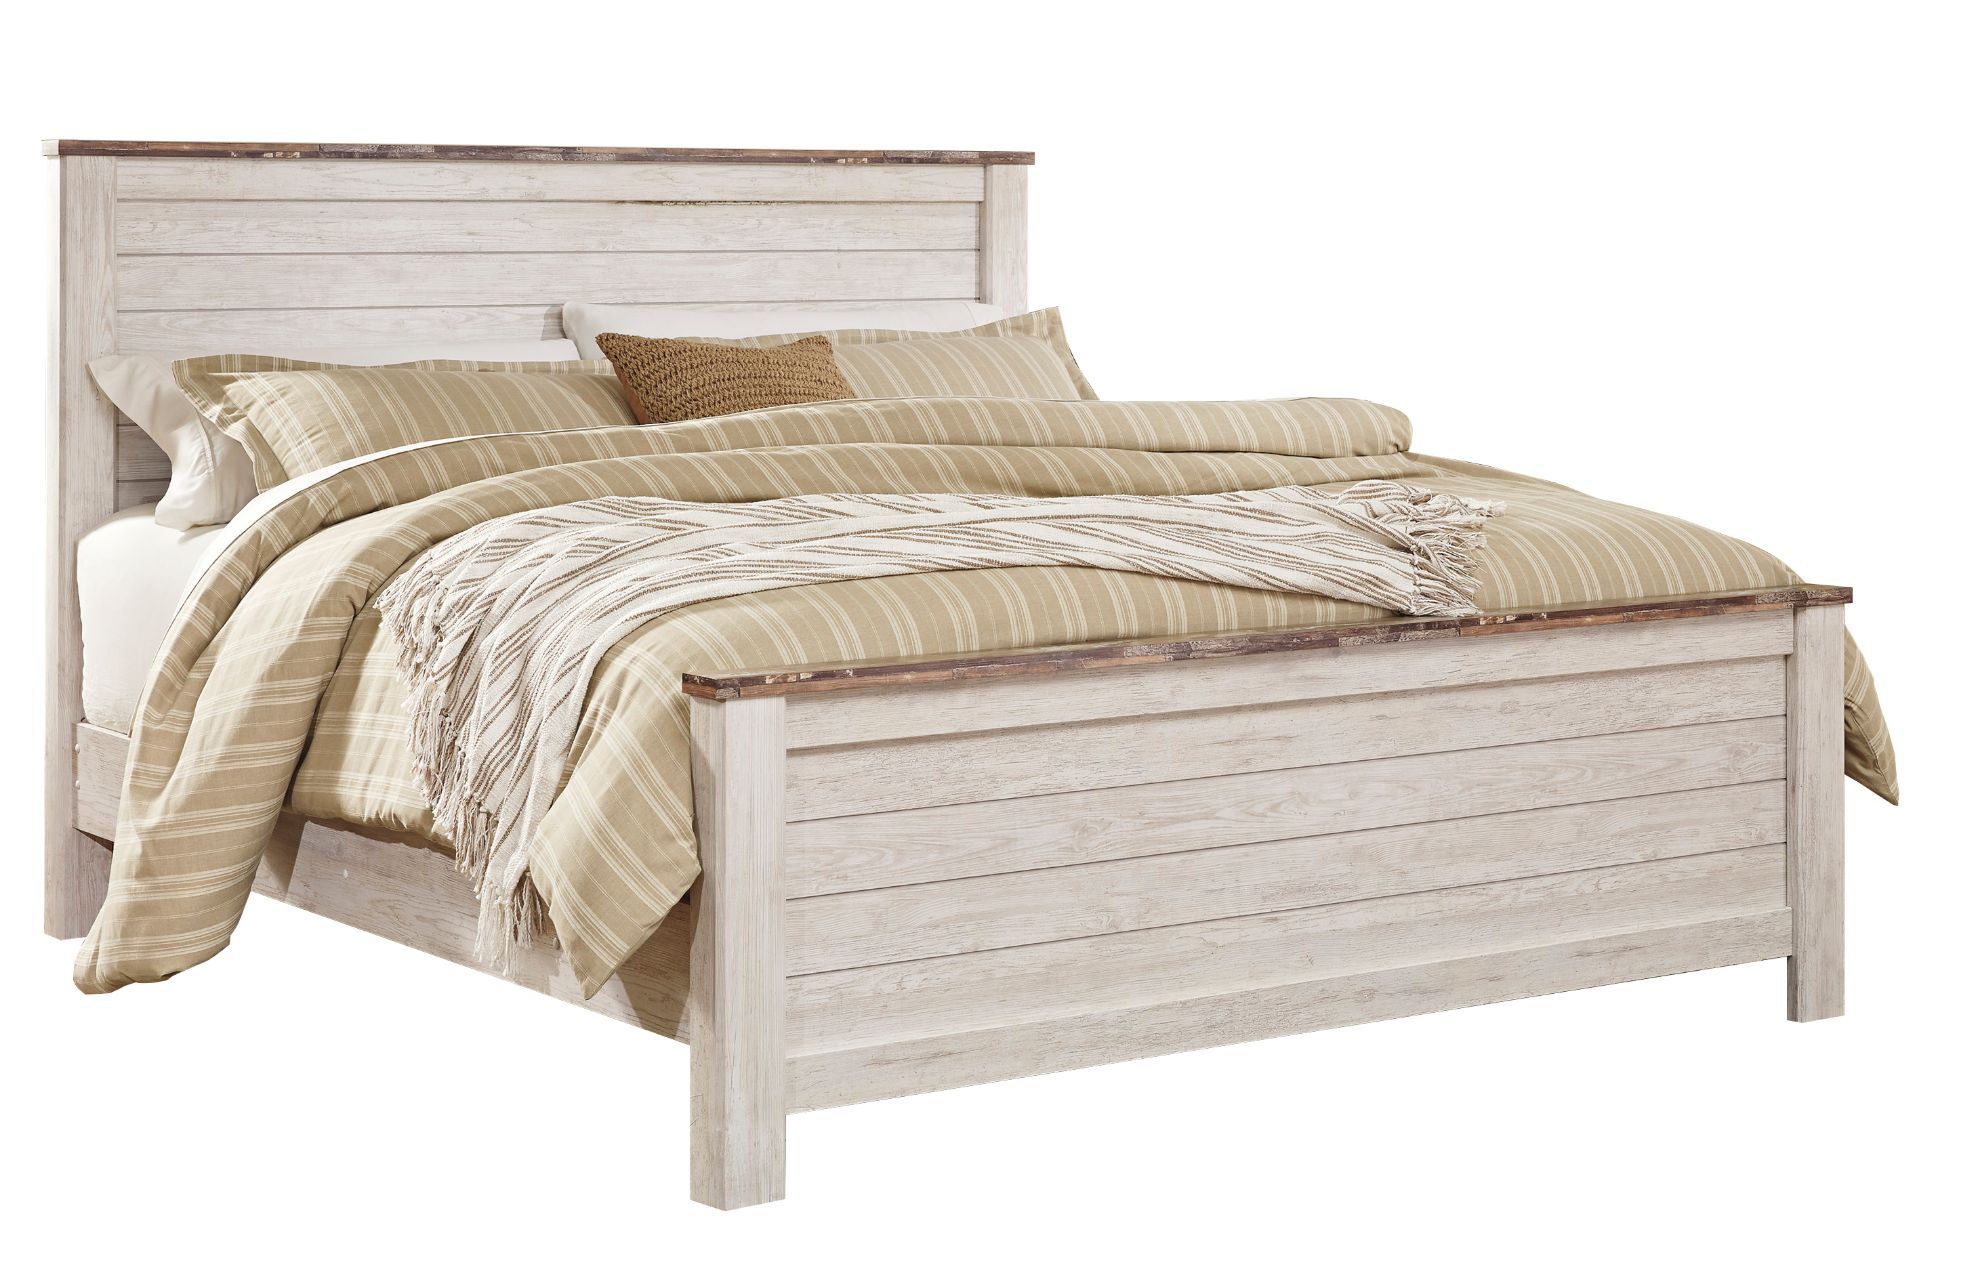 Willowton King Bed